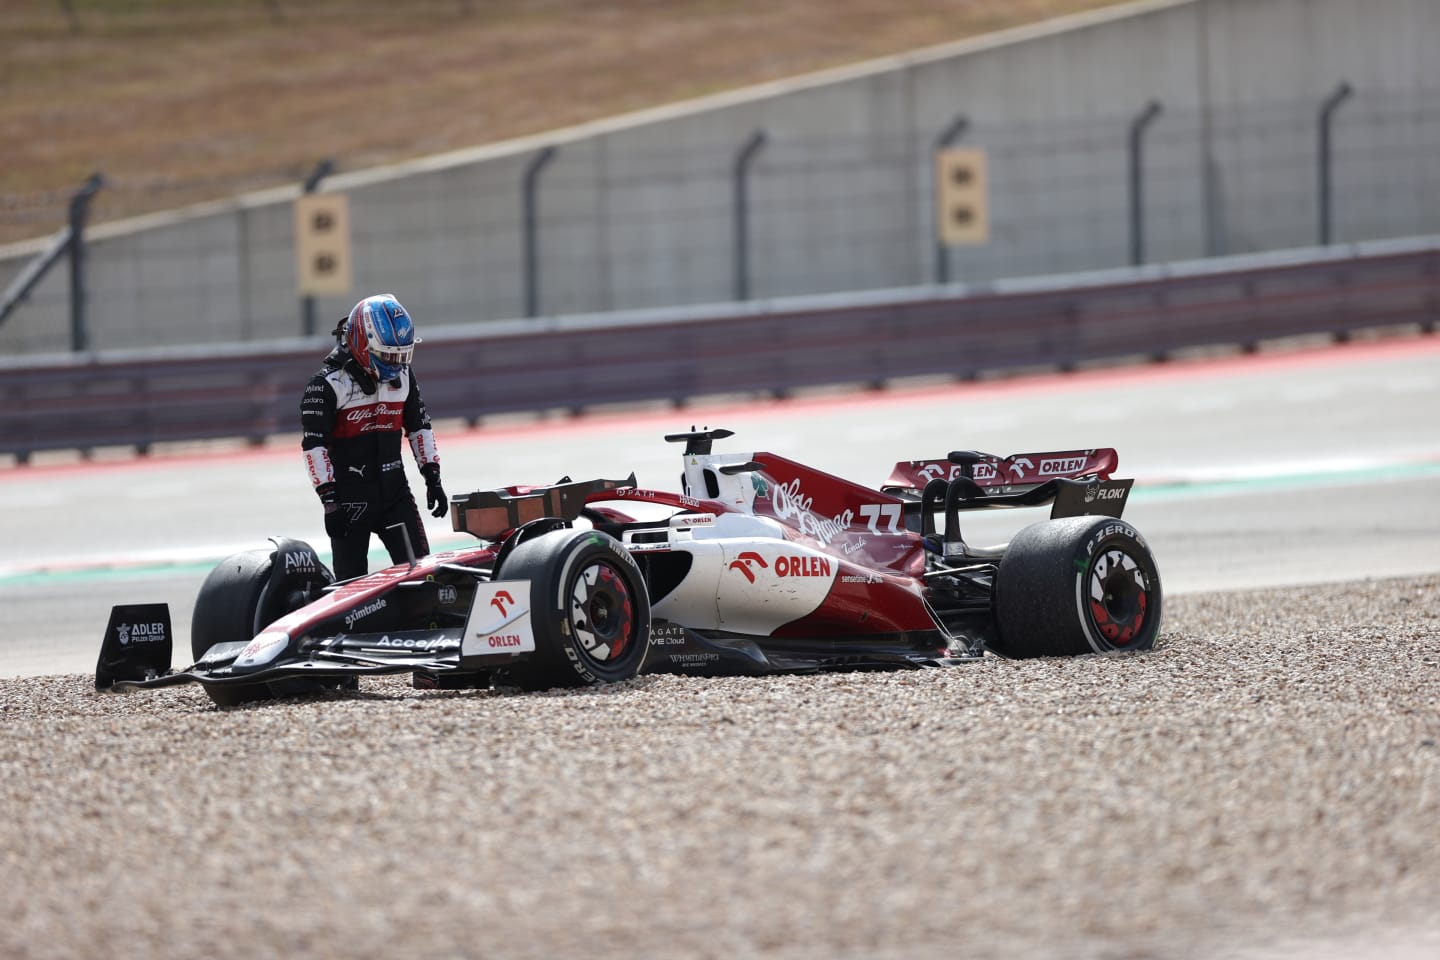 AUSTIN, TEXAS - OCTOBER 23: Valterri Bottas of Alfa Romeo and Finland crashes out during the F1 Grand Prix of USA at Circuit of The Americas on October 23, 2022 in Austin, Texas. (Photo by Peter J Fox/Getty Images)